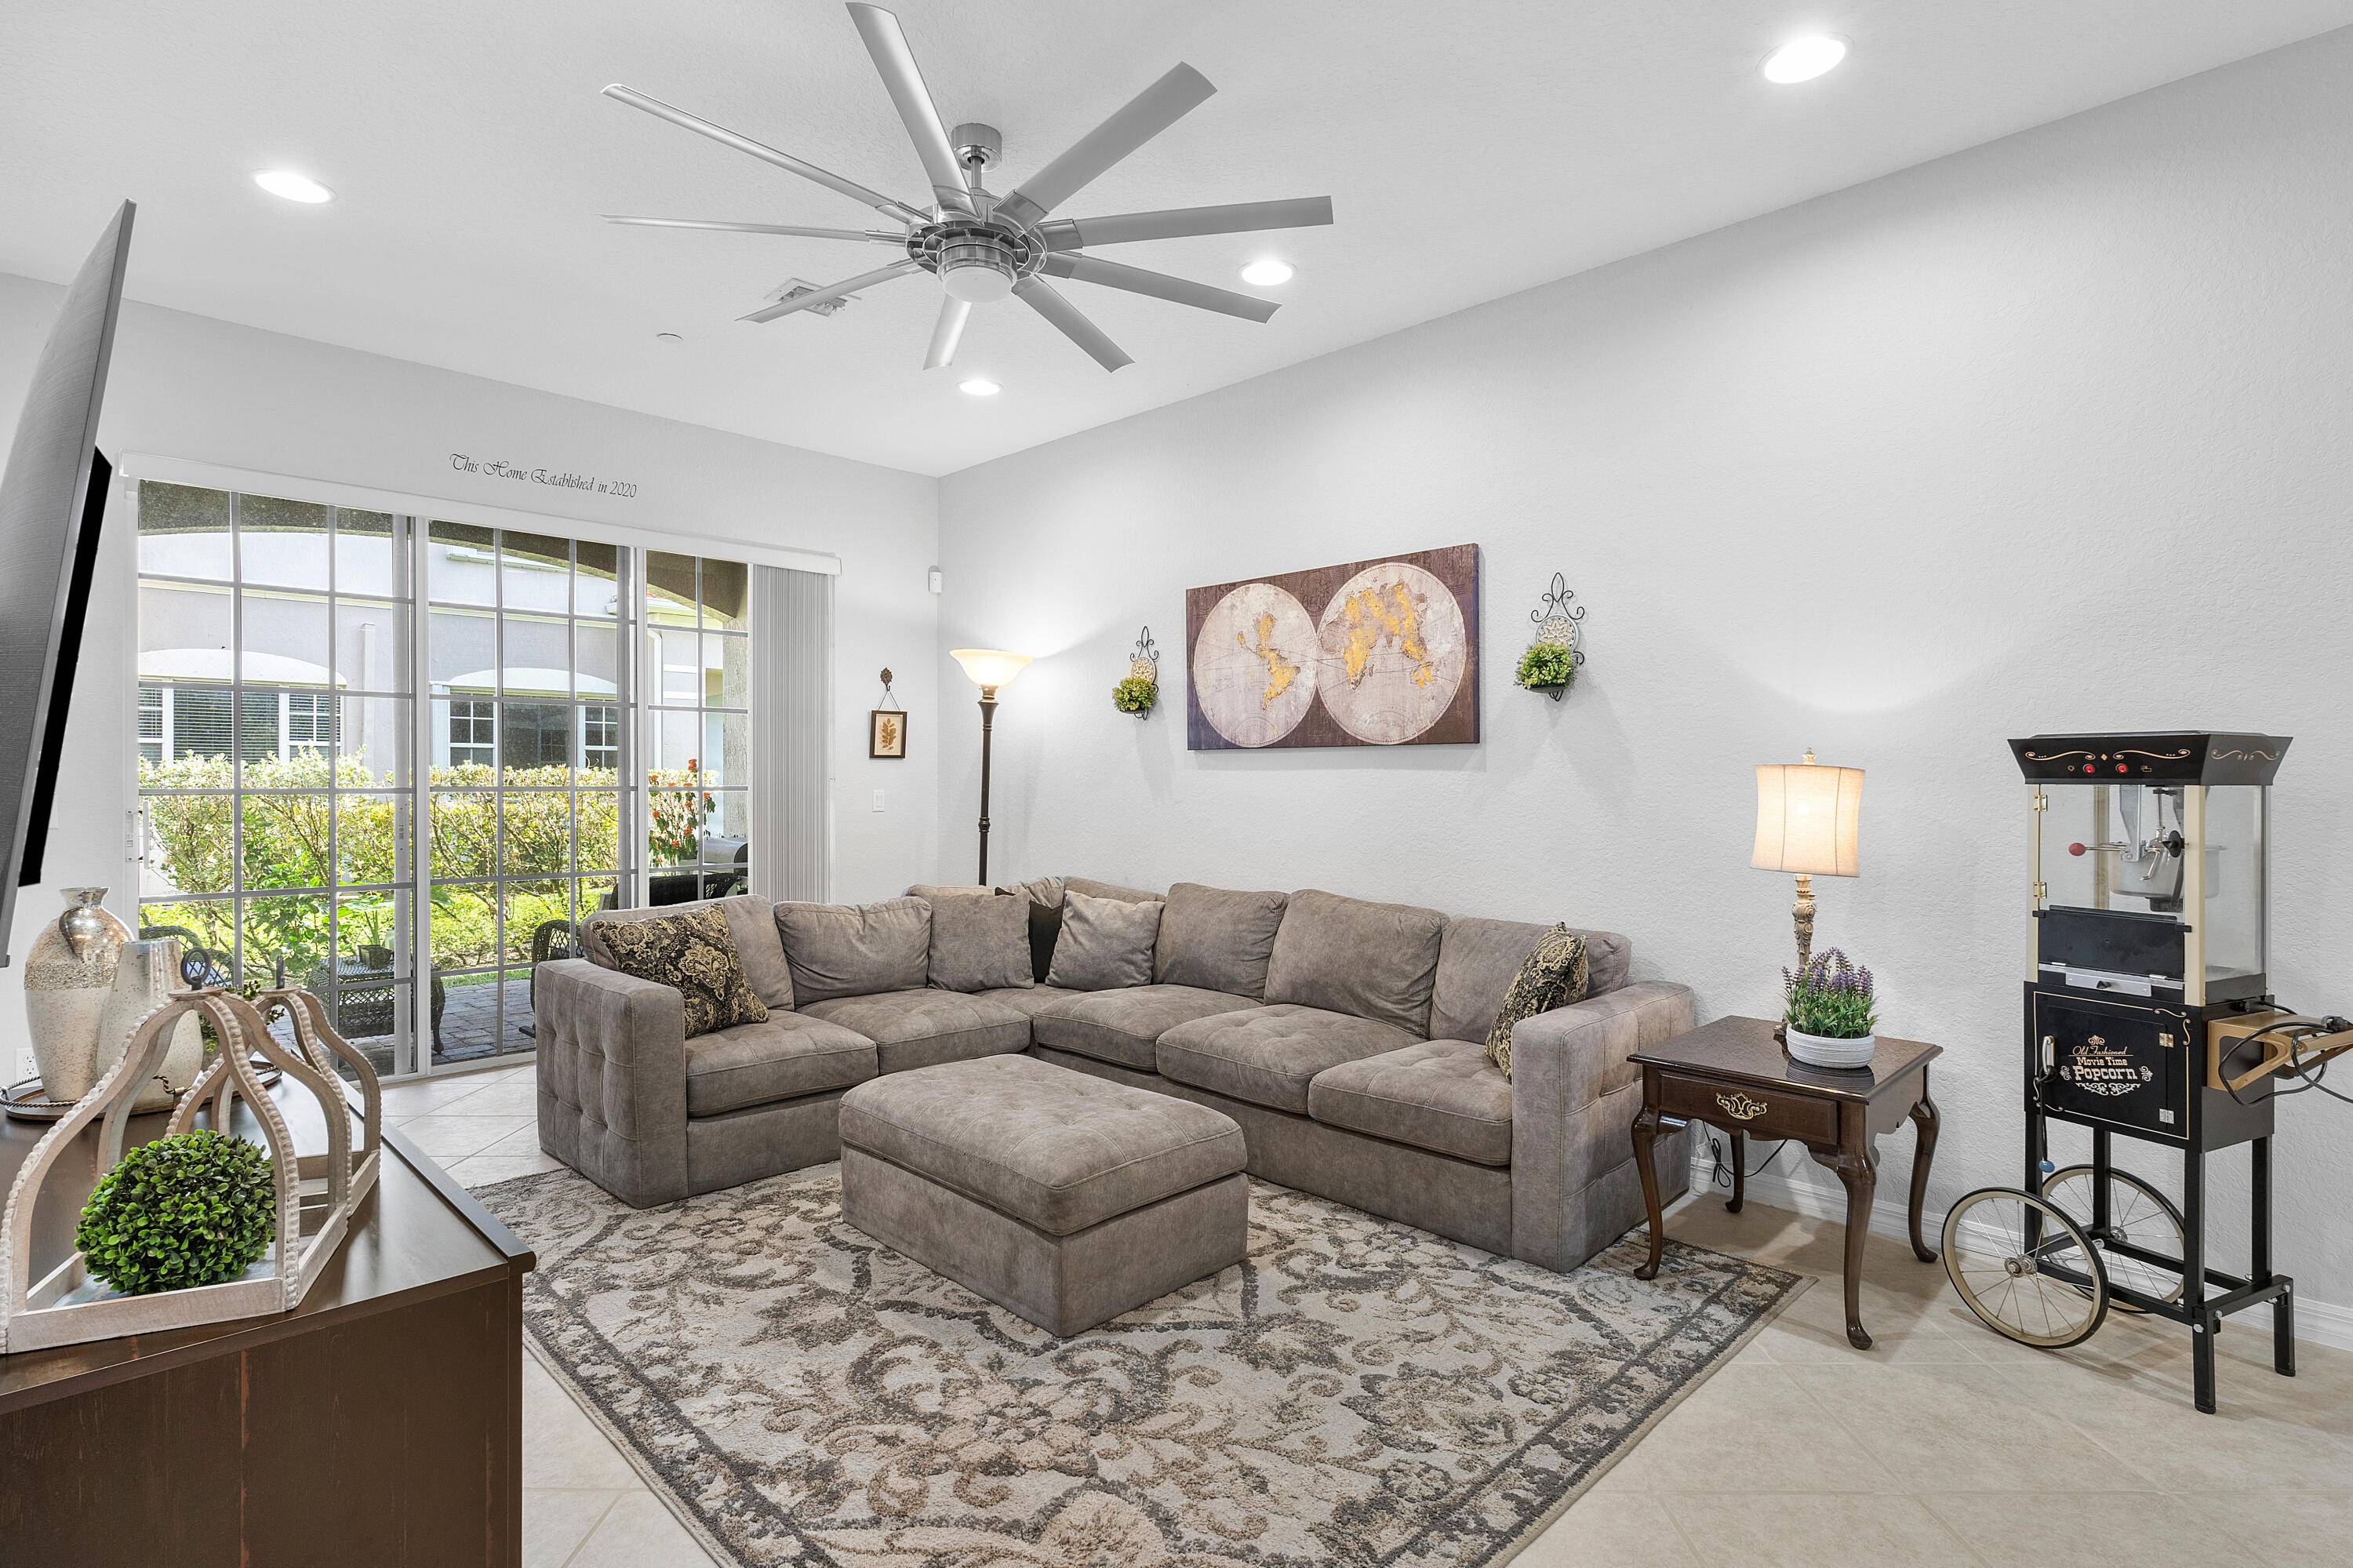 Nestled within the inviting Carriage Pointe community, just minutes from downtown Delray Beach and Atlantic Ave.